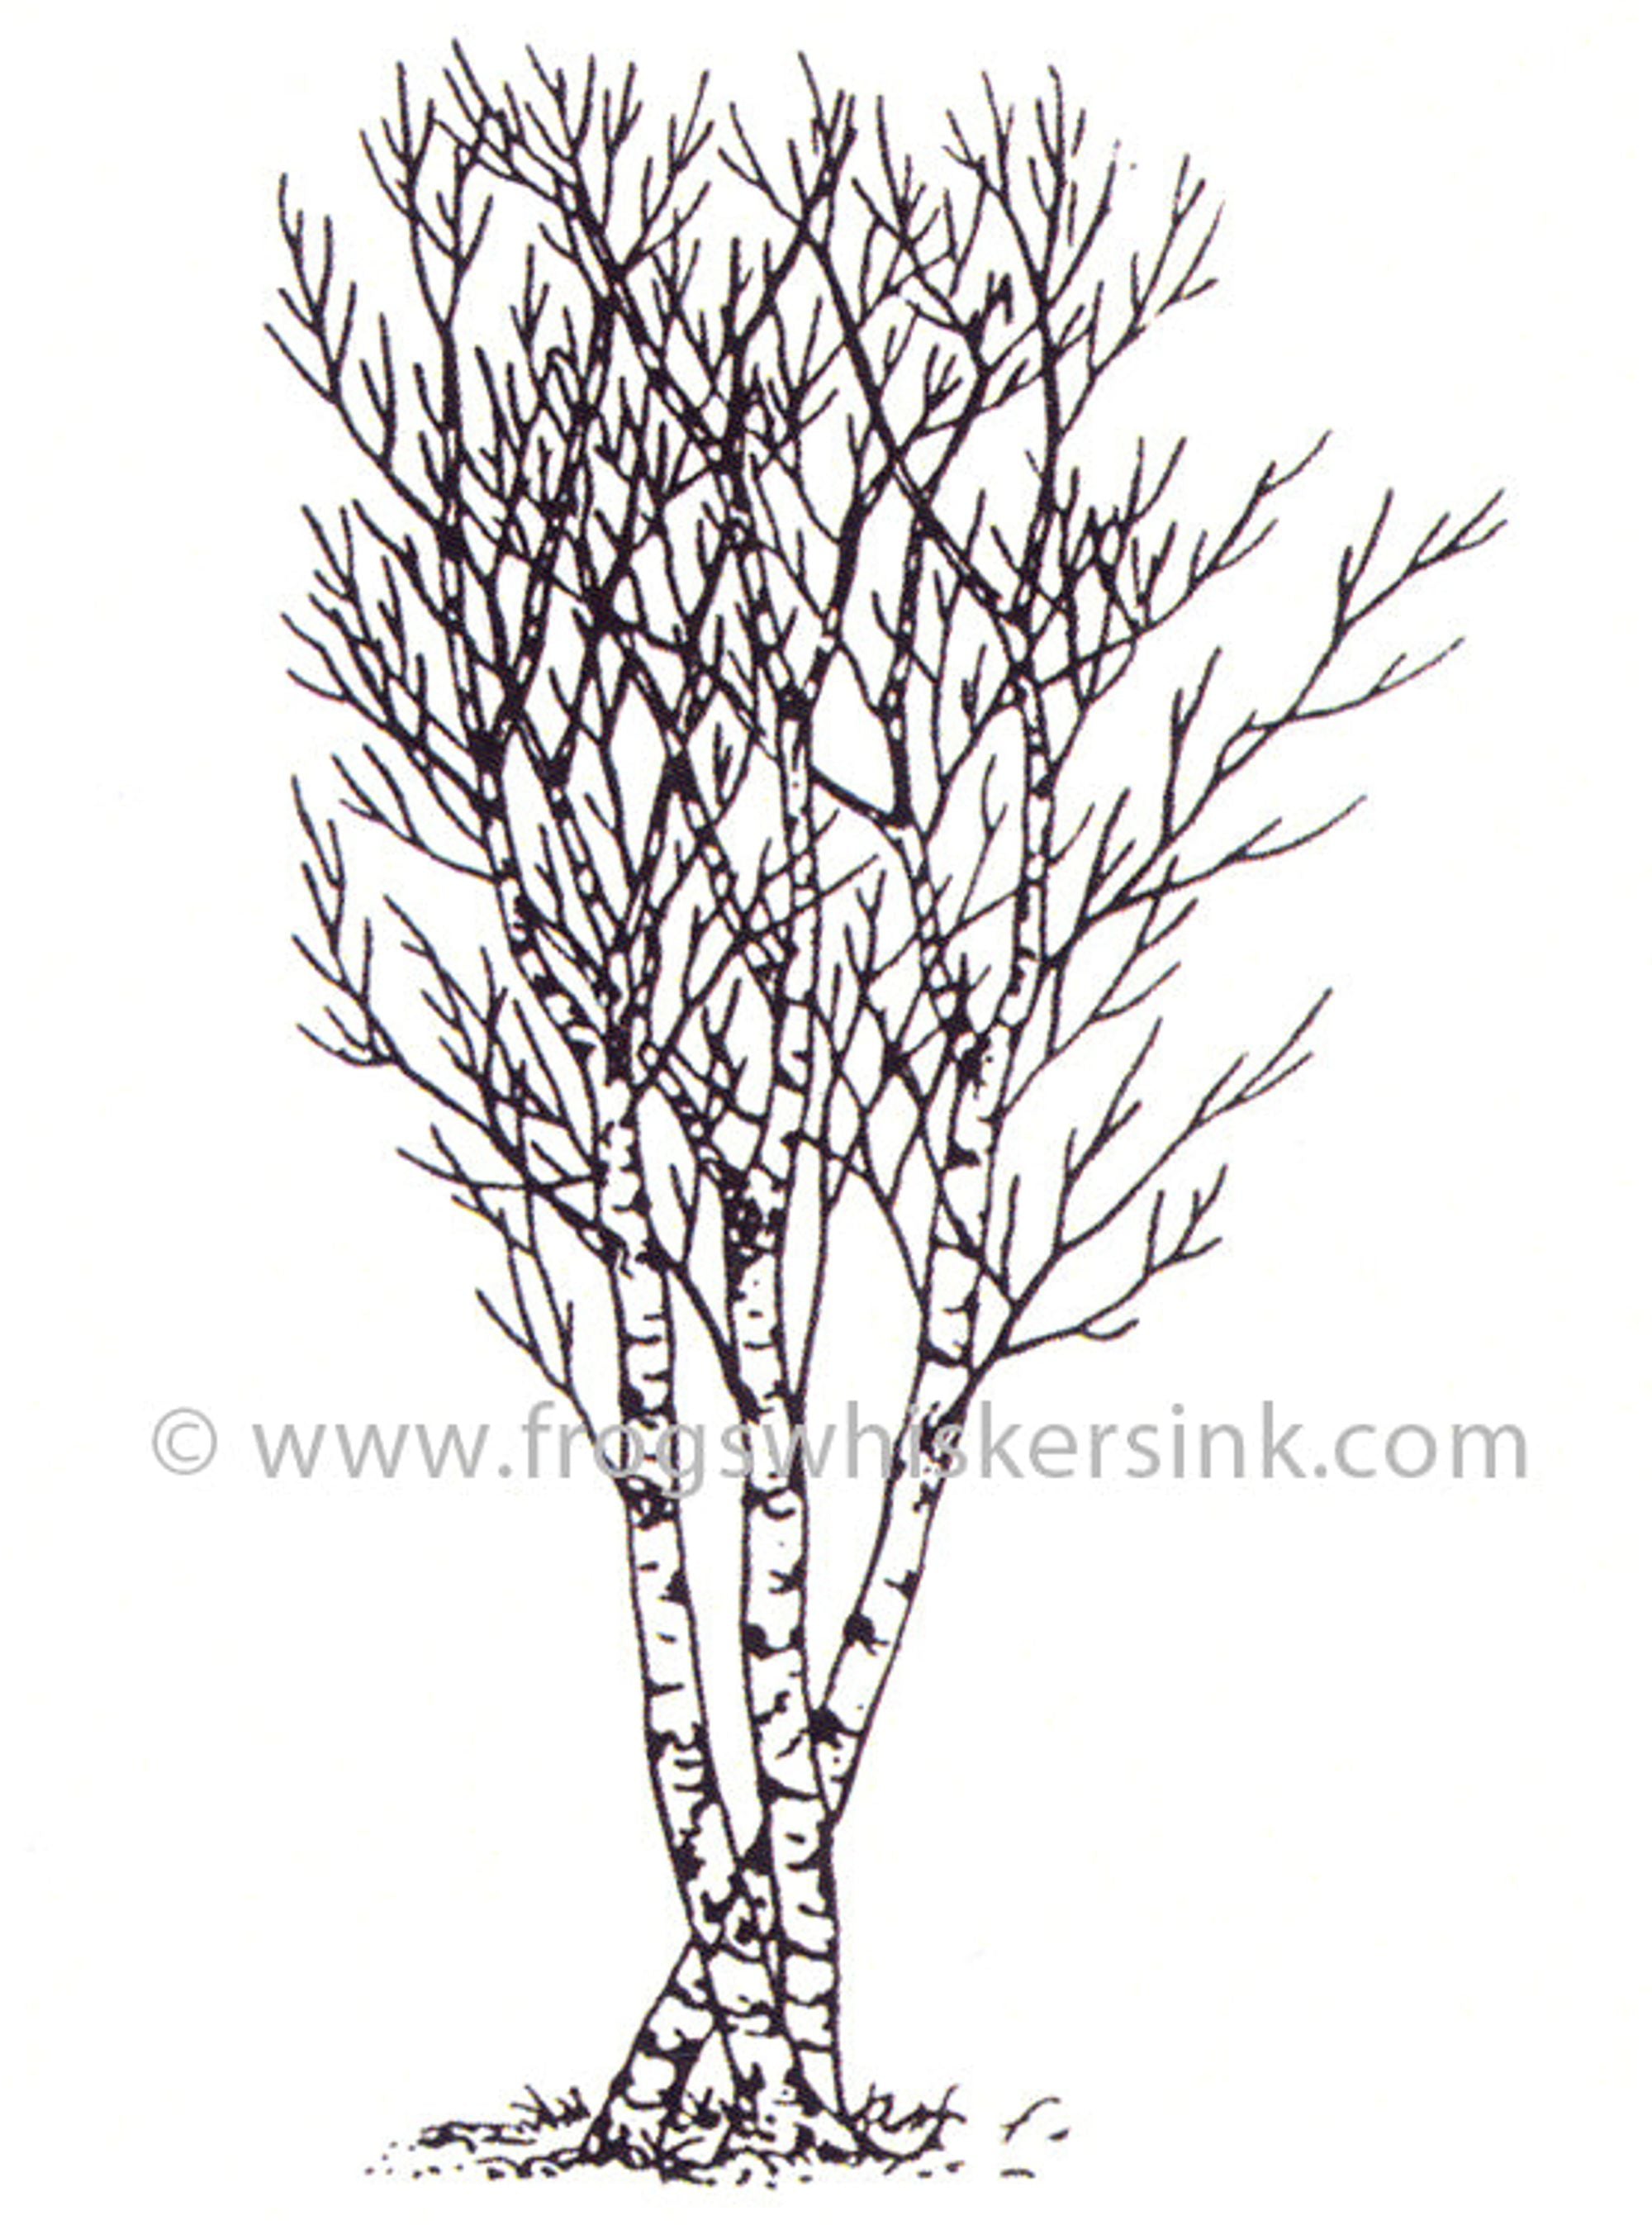 Frog's Whiskers Ink Stamps -Birch Tree Sm Cling Mount Stamp